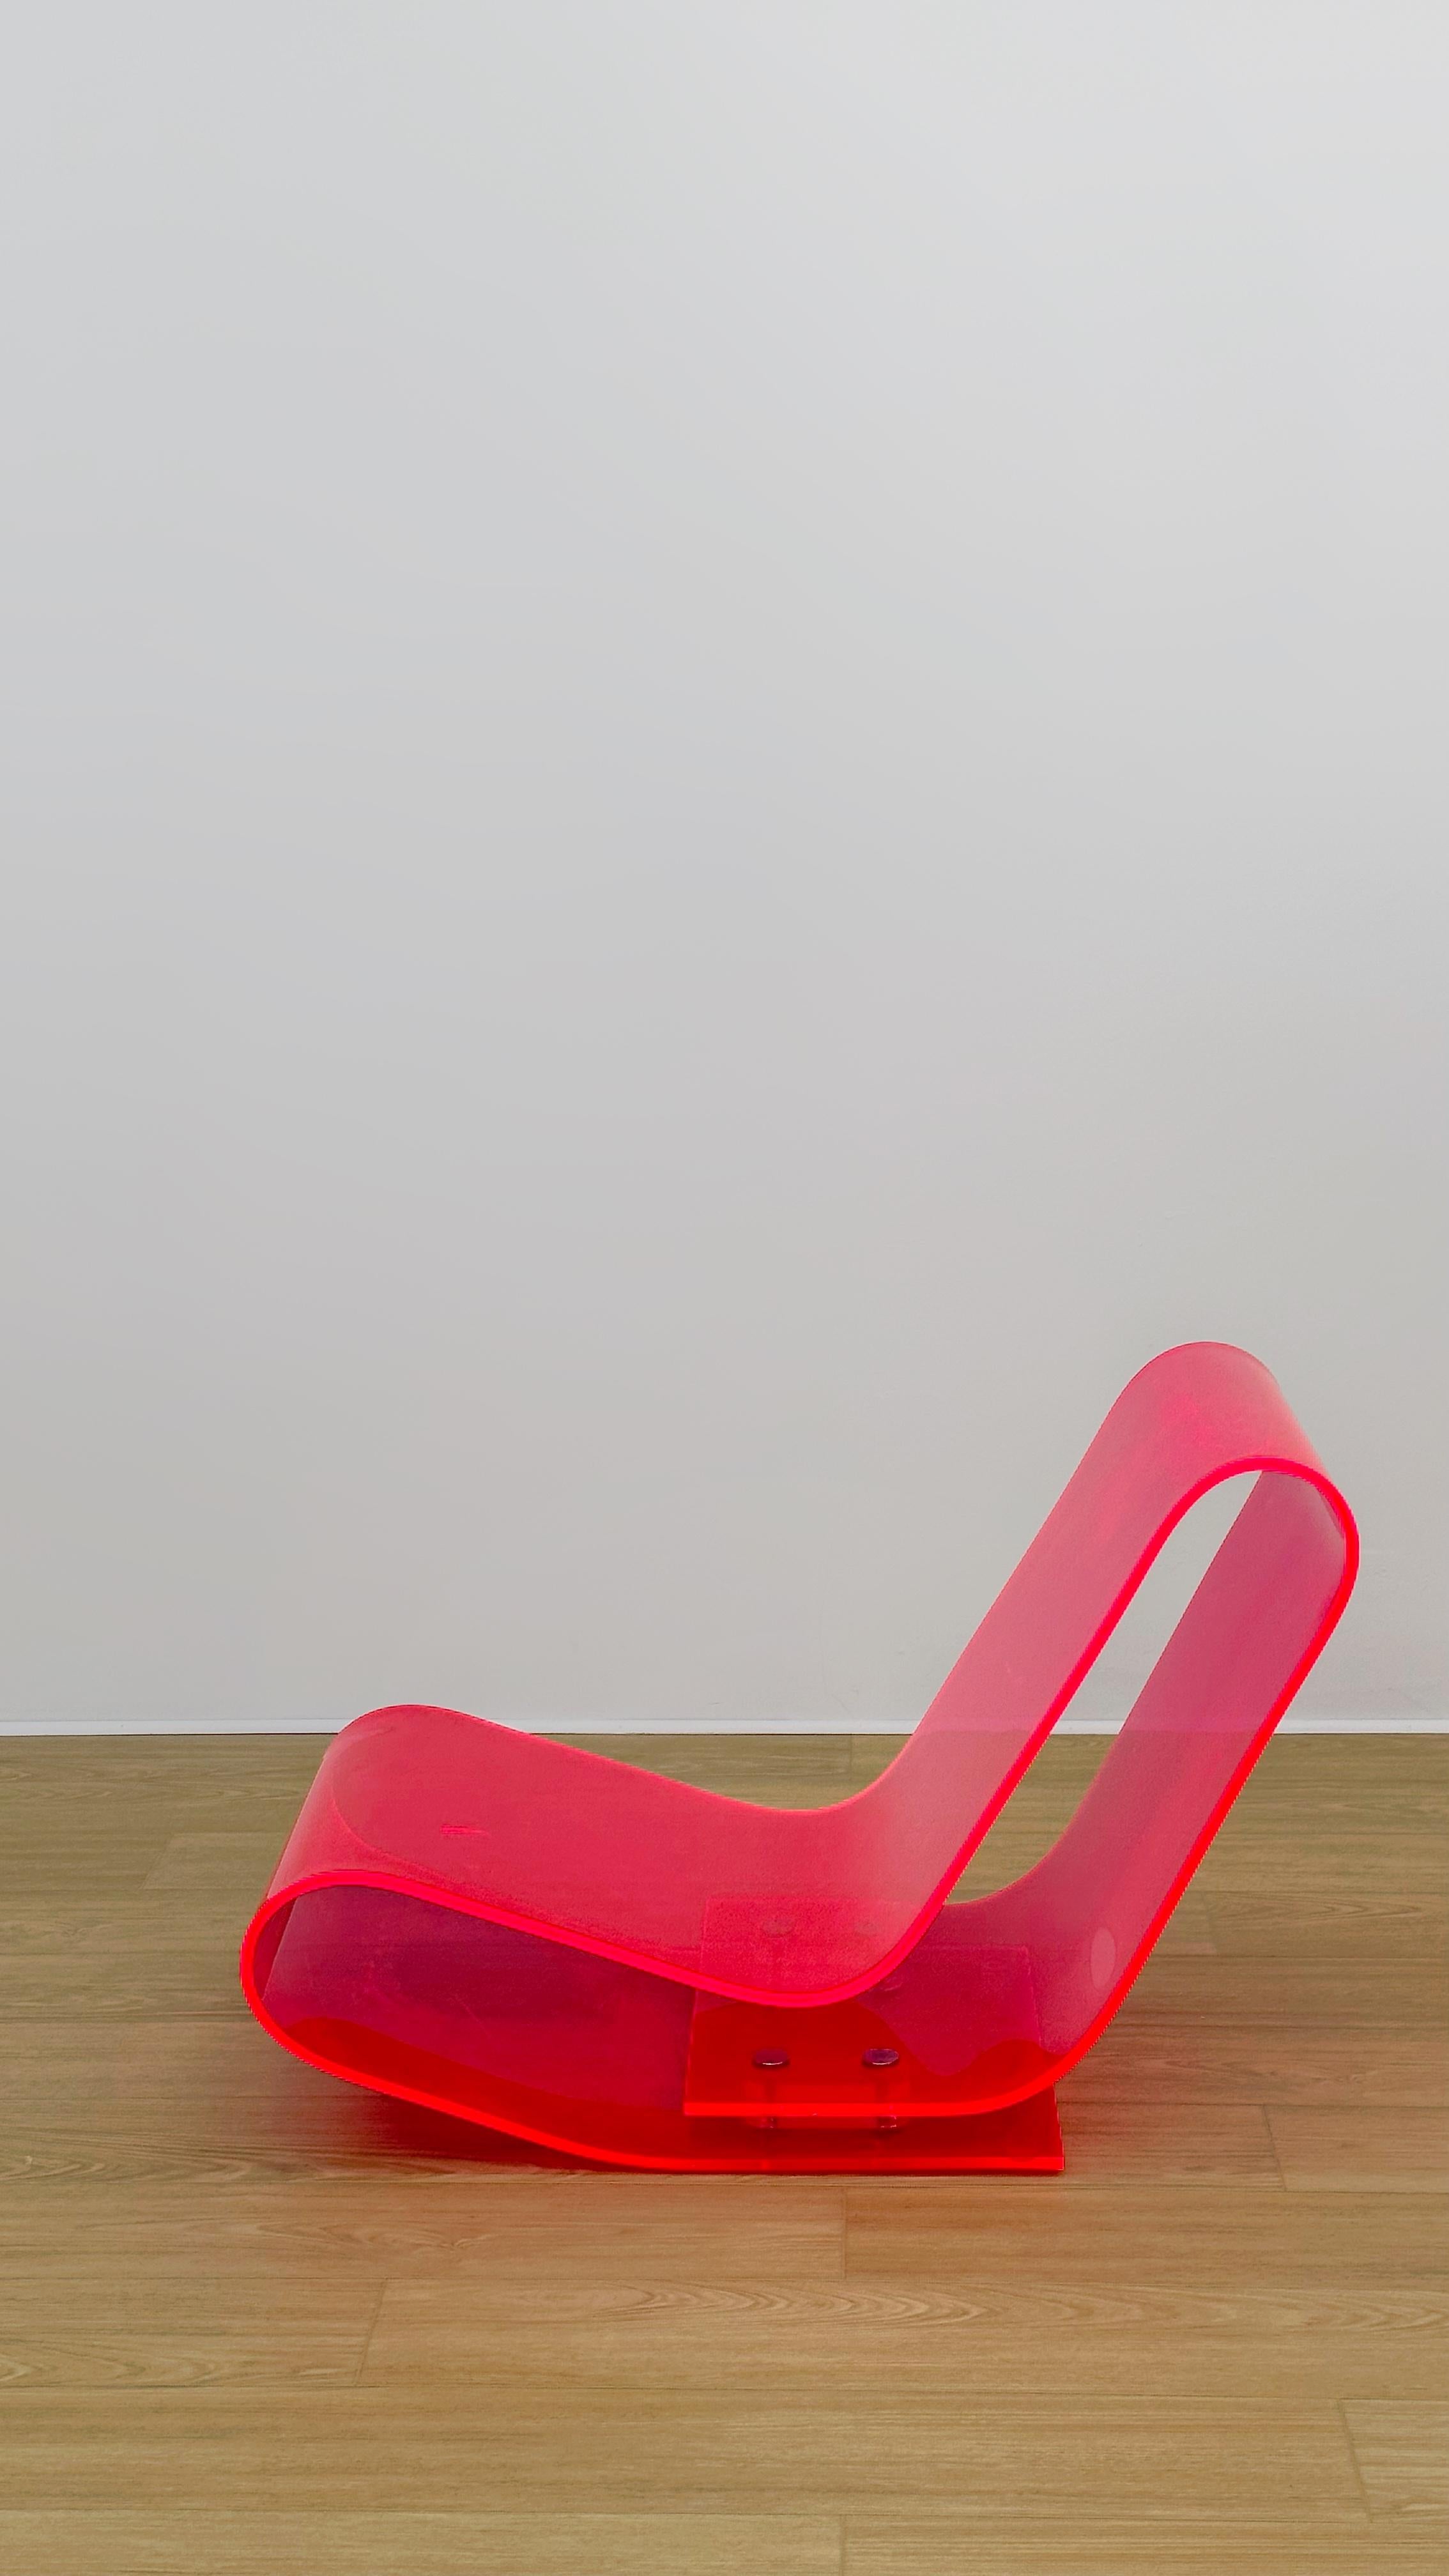 Italy, 2001. Batch-dyed PMMA molded into an open loop that folds back on itself. The plastic evolution of the designer’s 1993 LC95A aluminum chair. Originally produced in clear, neon pink, neon yellow and blue, only clear remains in production today.